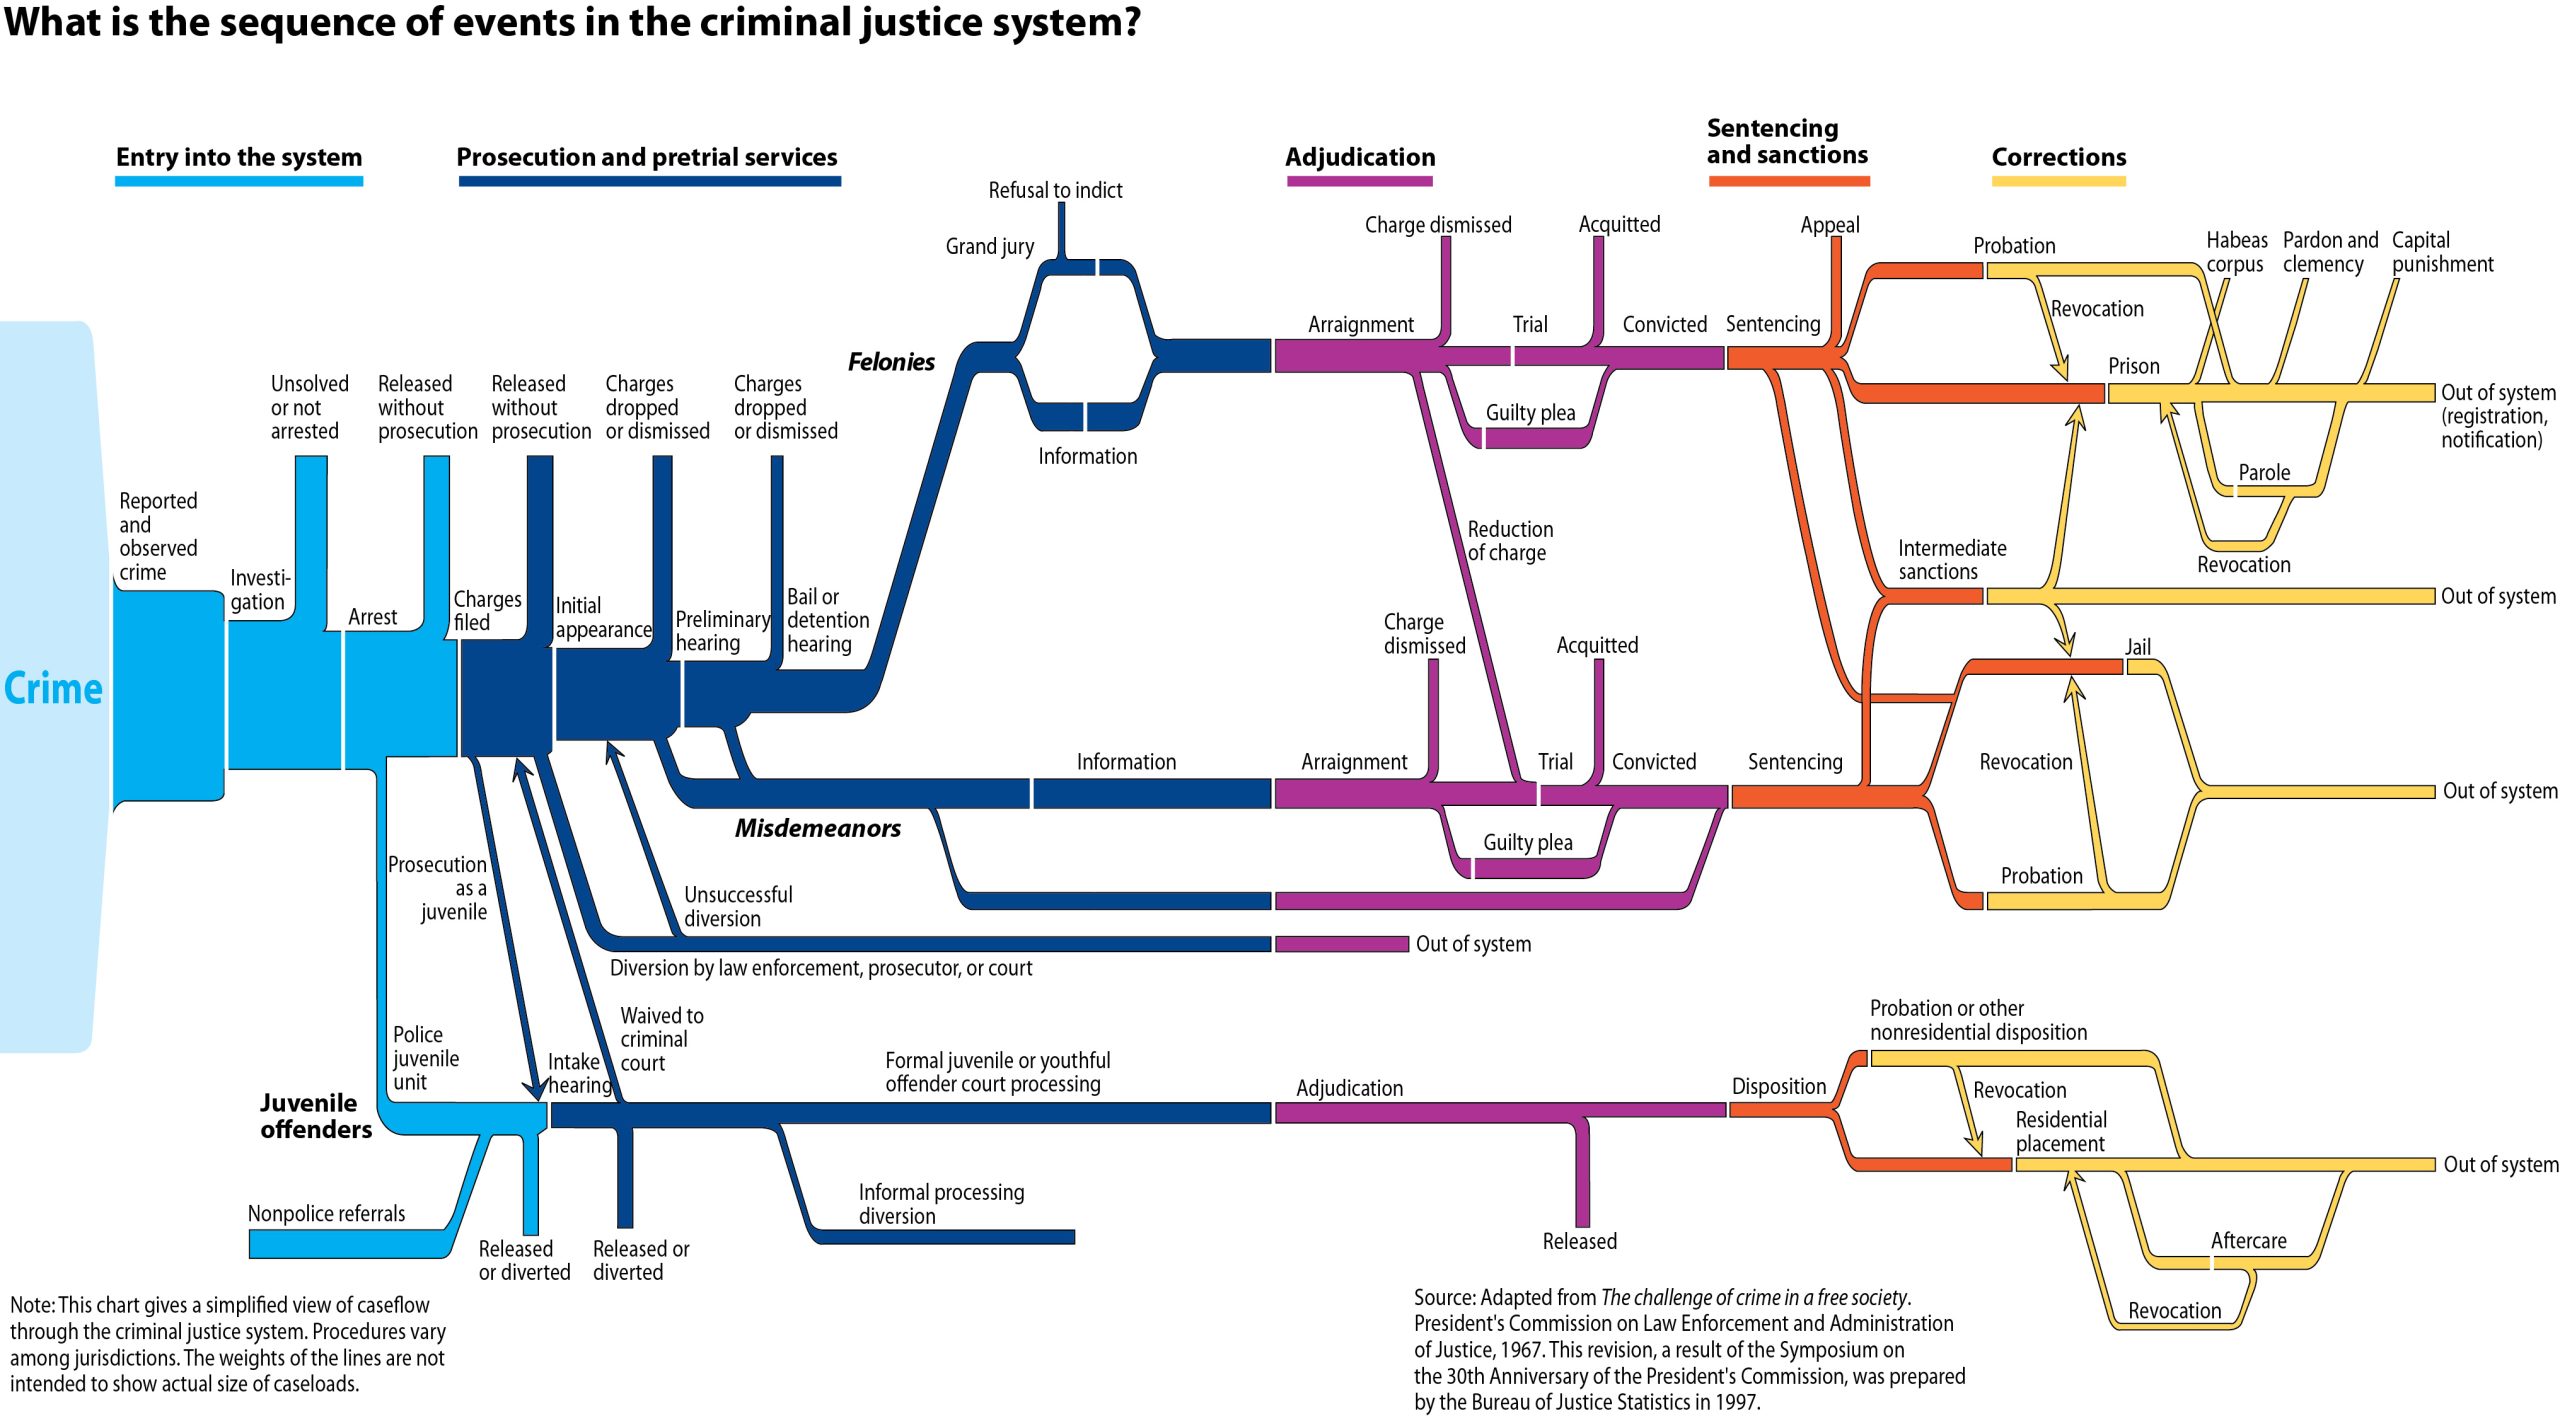 Chart that depicts the sequence of events in the criminal justice system. Entry into the system, prosecution and pretrial services, adjudication, sentencing and sanctions, and corrections